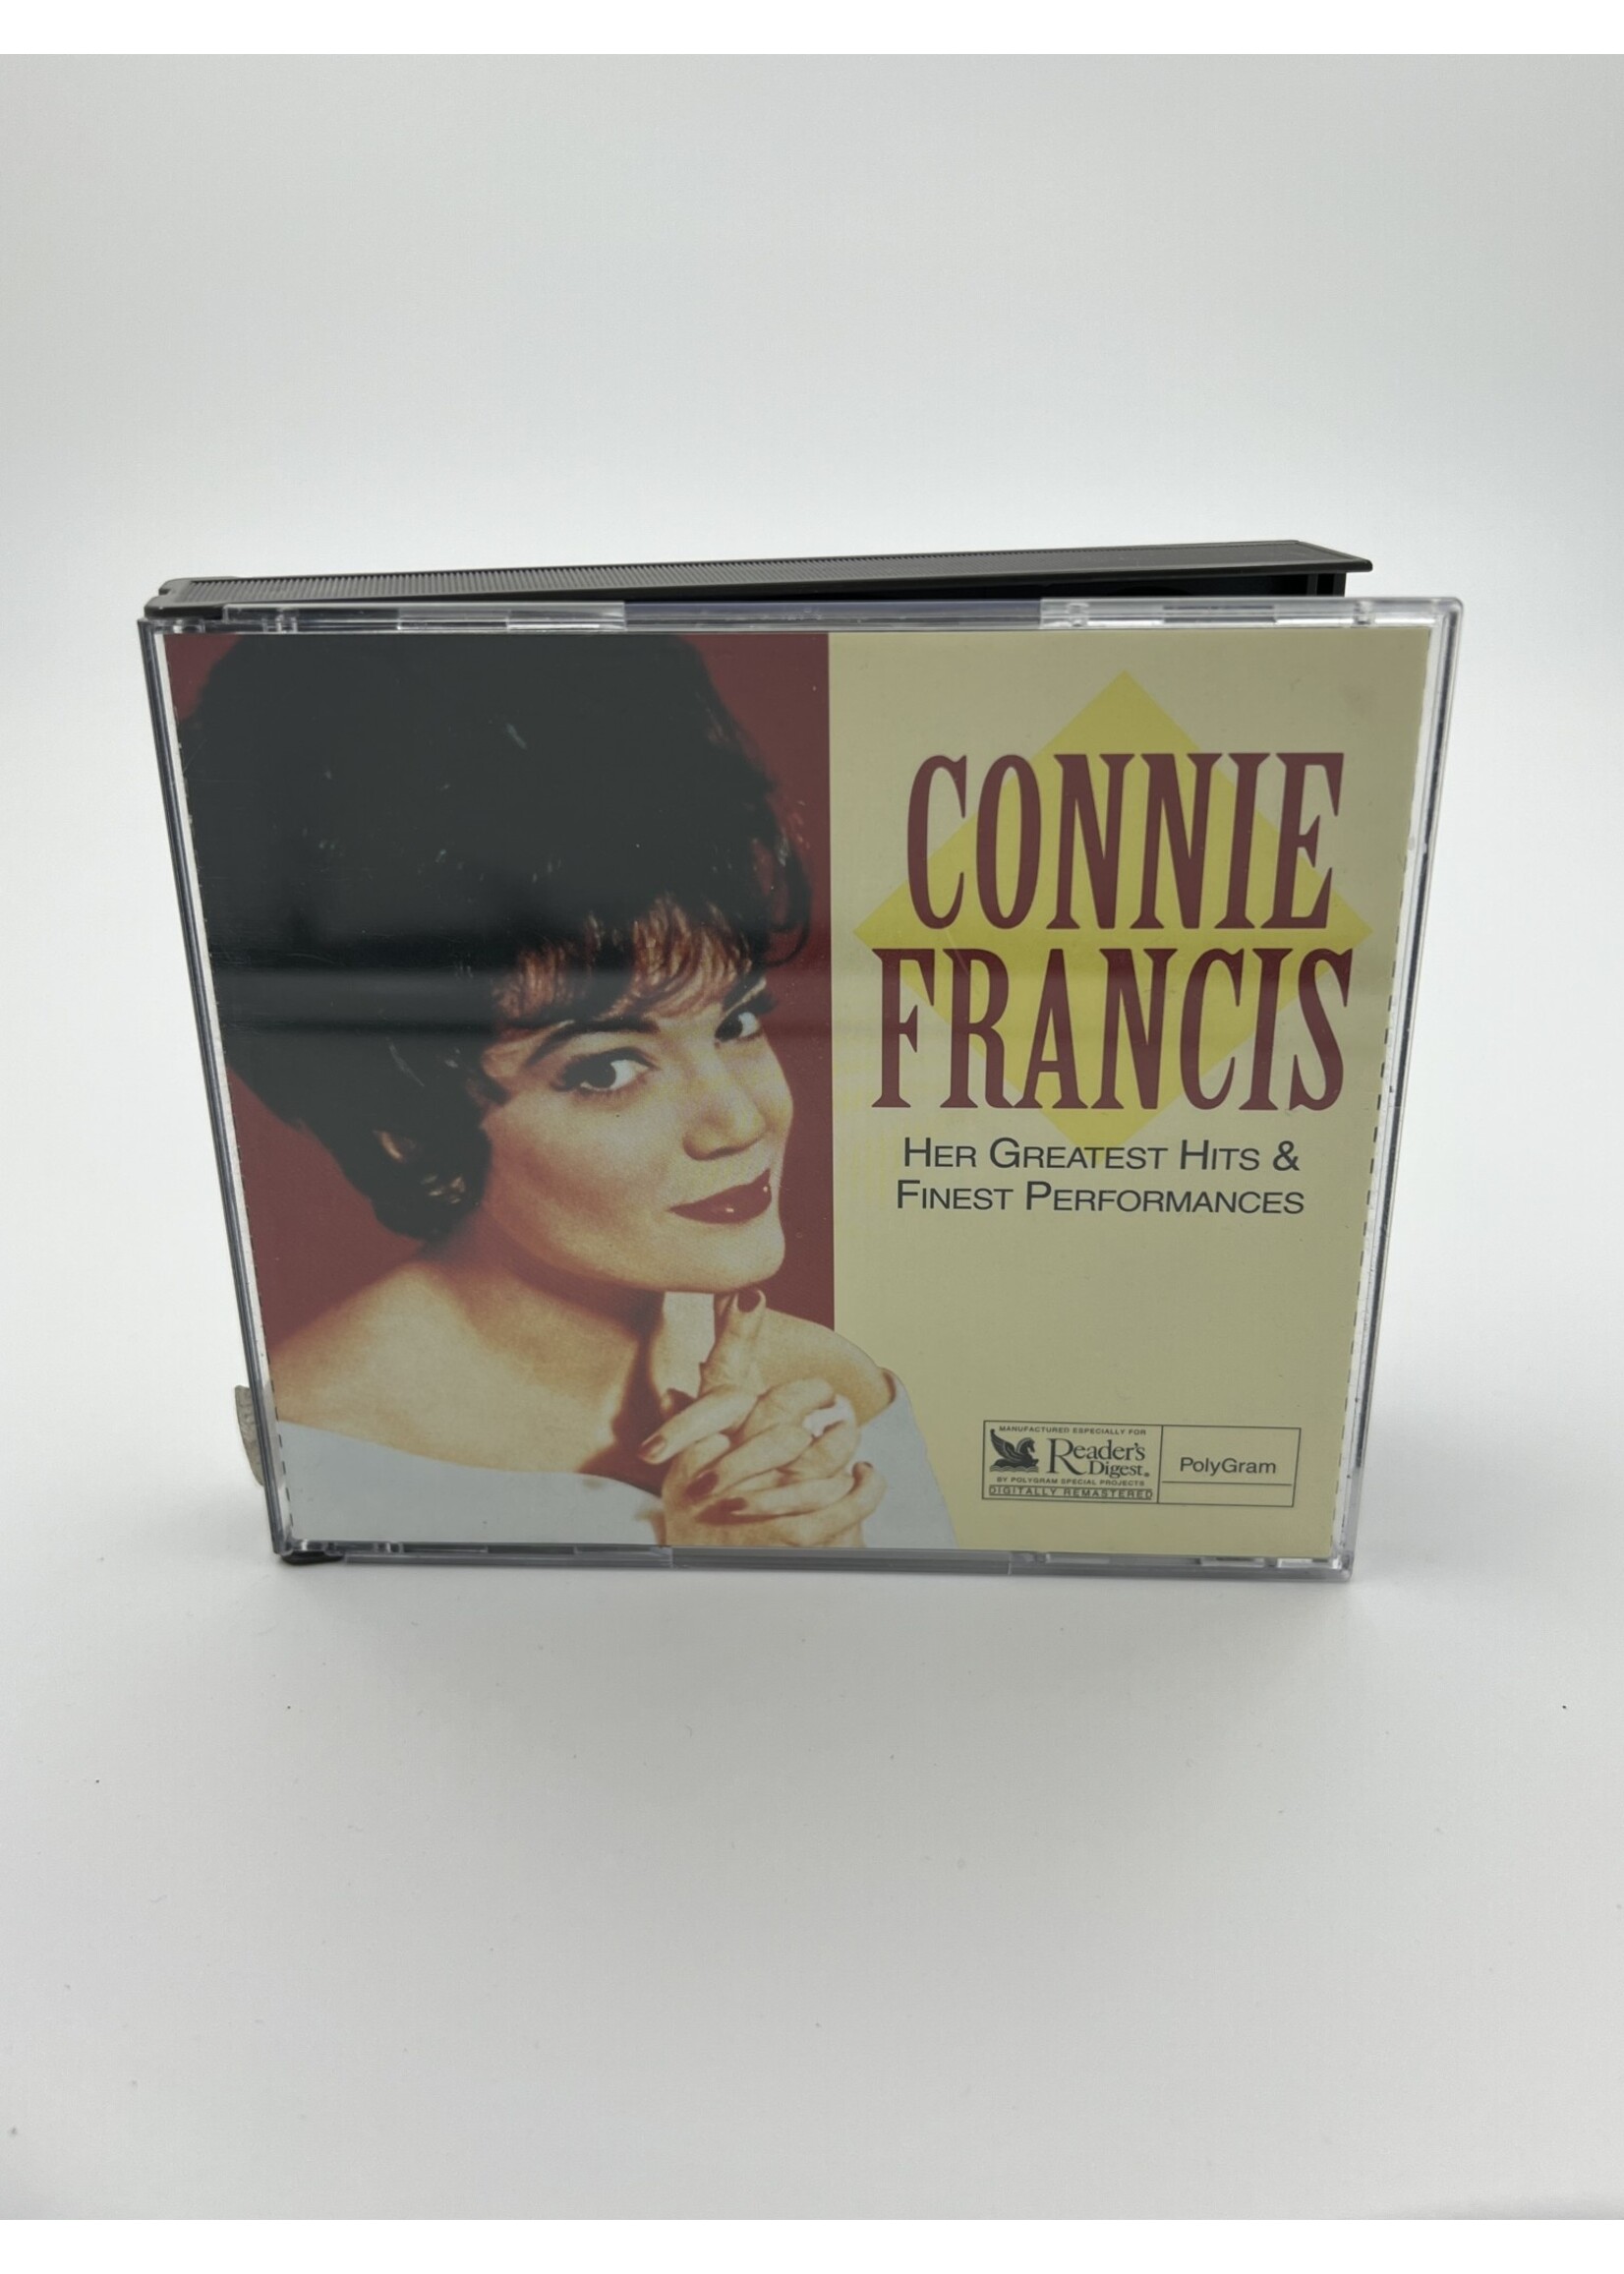 CD Connie Francis Her Greatest Hits And Finest Performances 3 CD